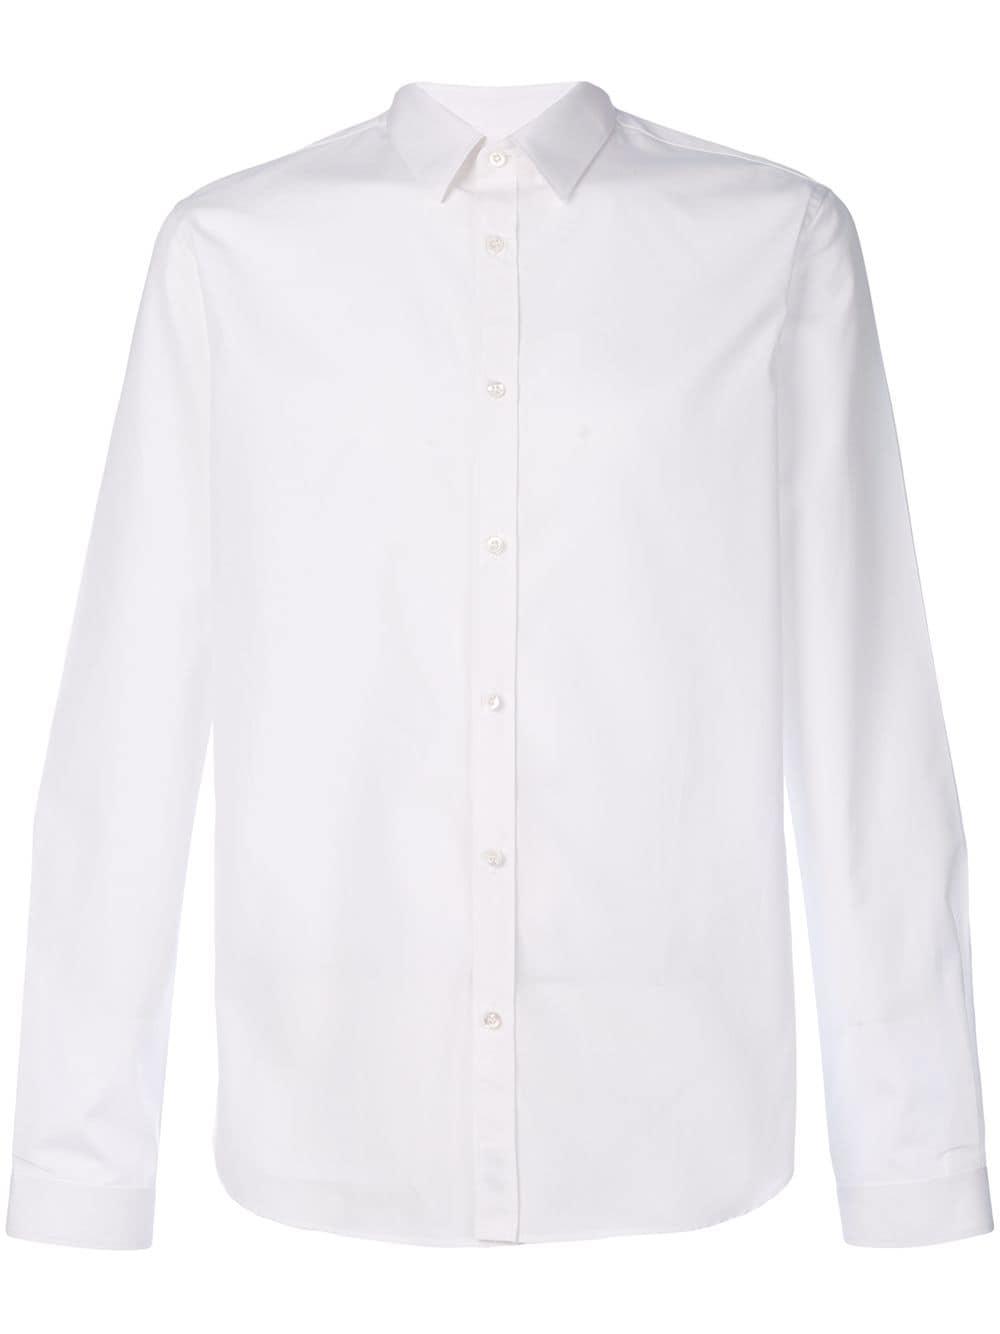 Gucci Cotton Loved Shirt in White for Men - Lyst